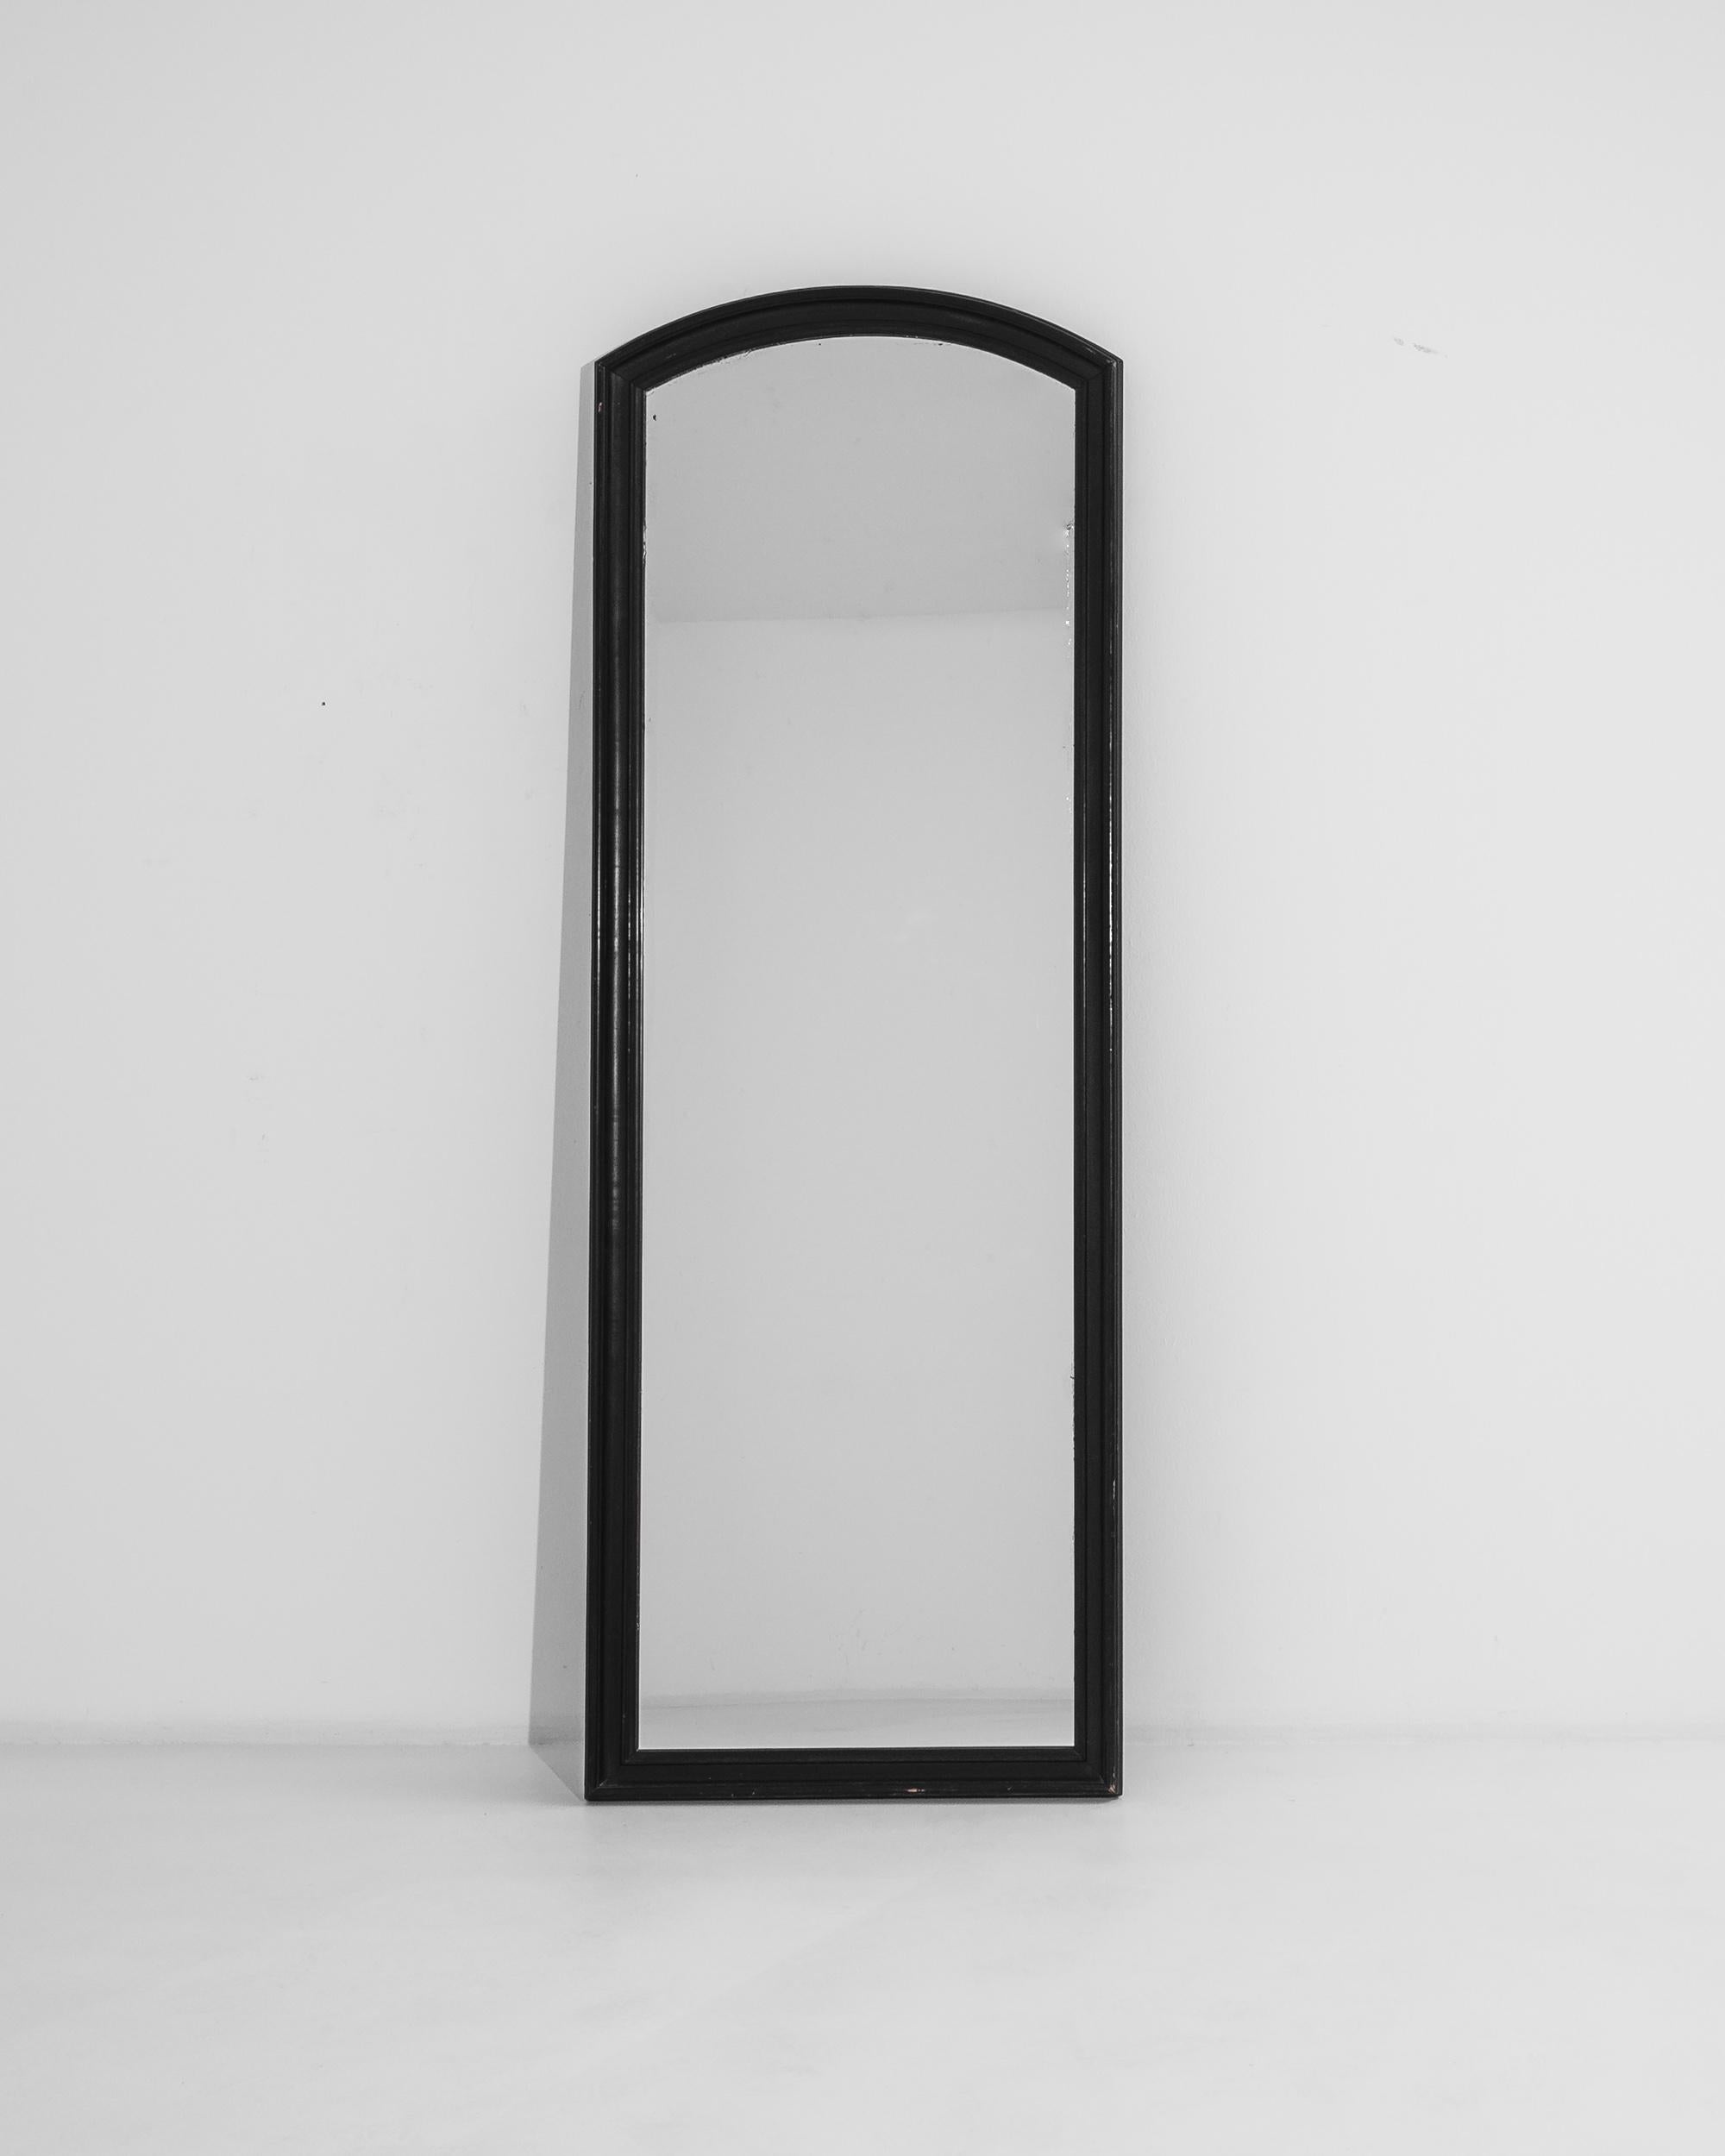 This antique wooden mirror was produced in France, circa 1880. Standing at over six feet, this tall patinated mirror is a sedate, functional statement piece that imparts an elegant simplicity. Slightly patinated, the lustrous black paint reveals